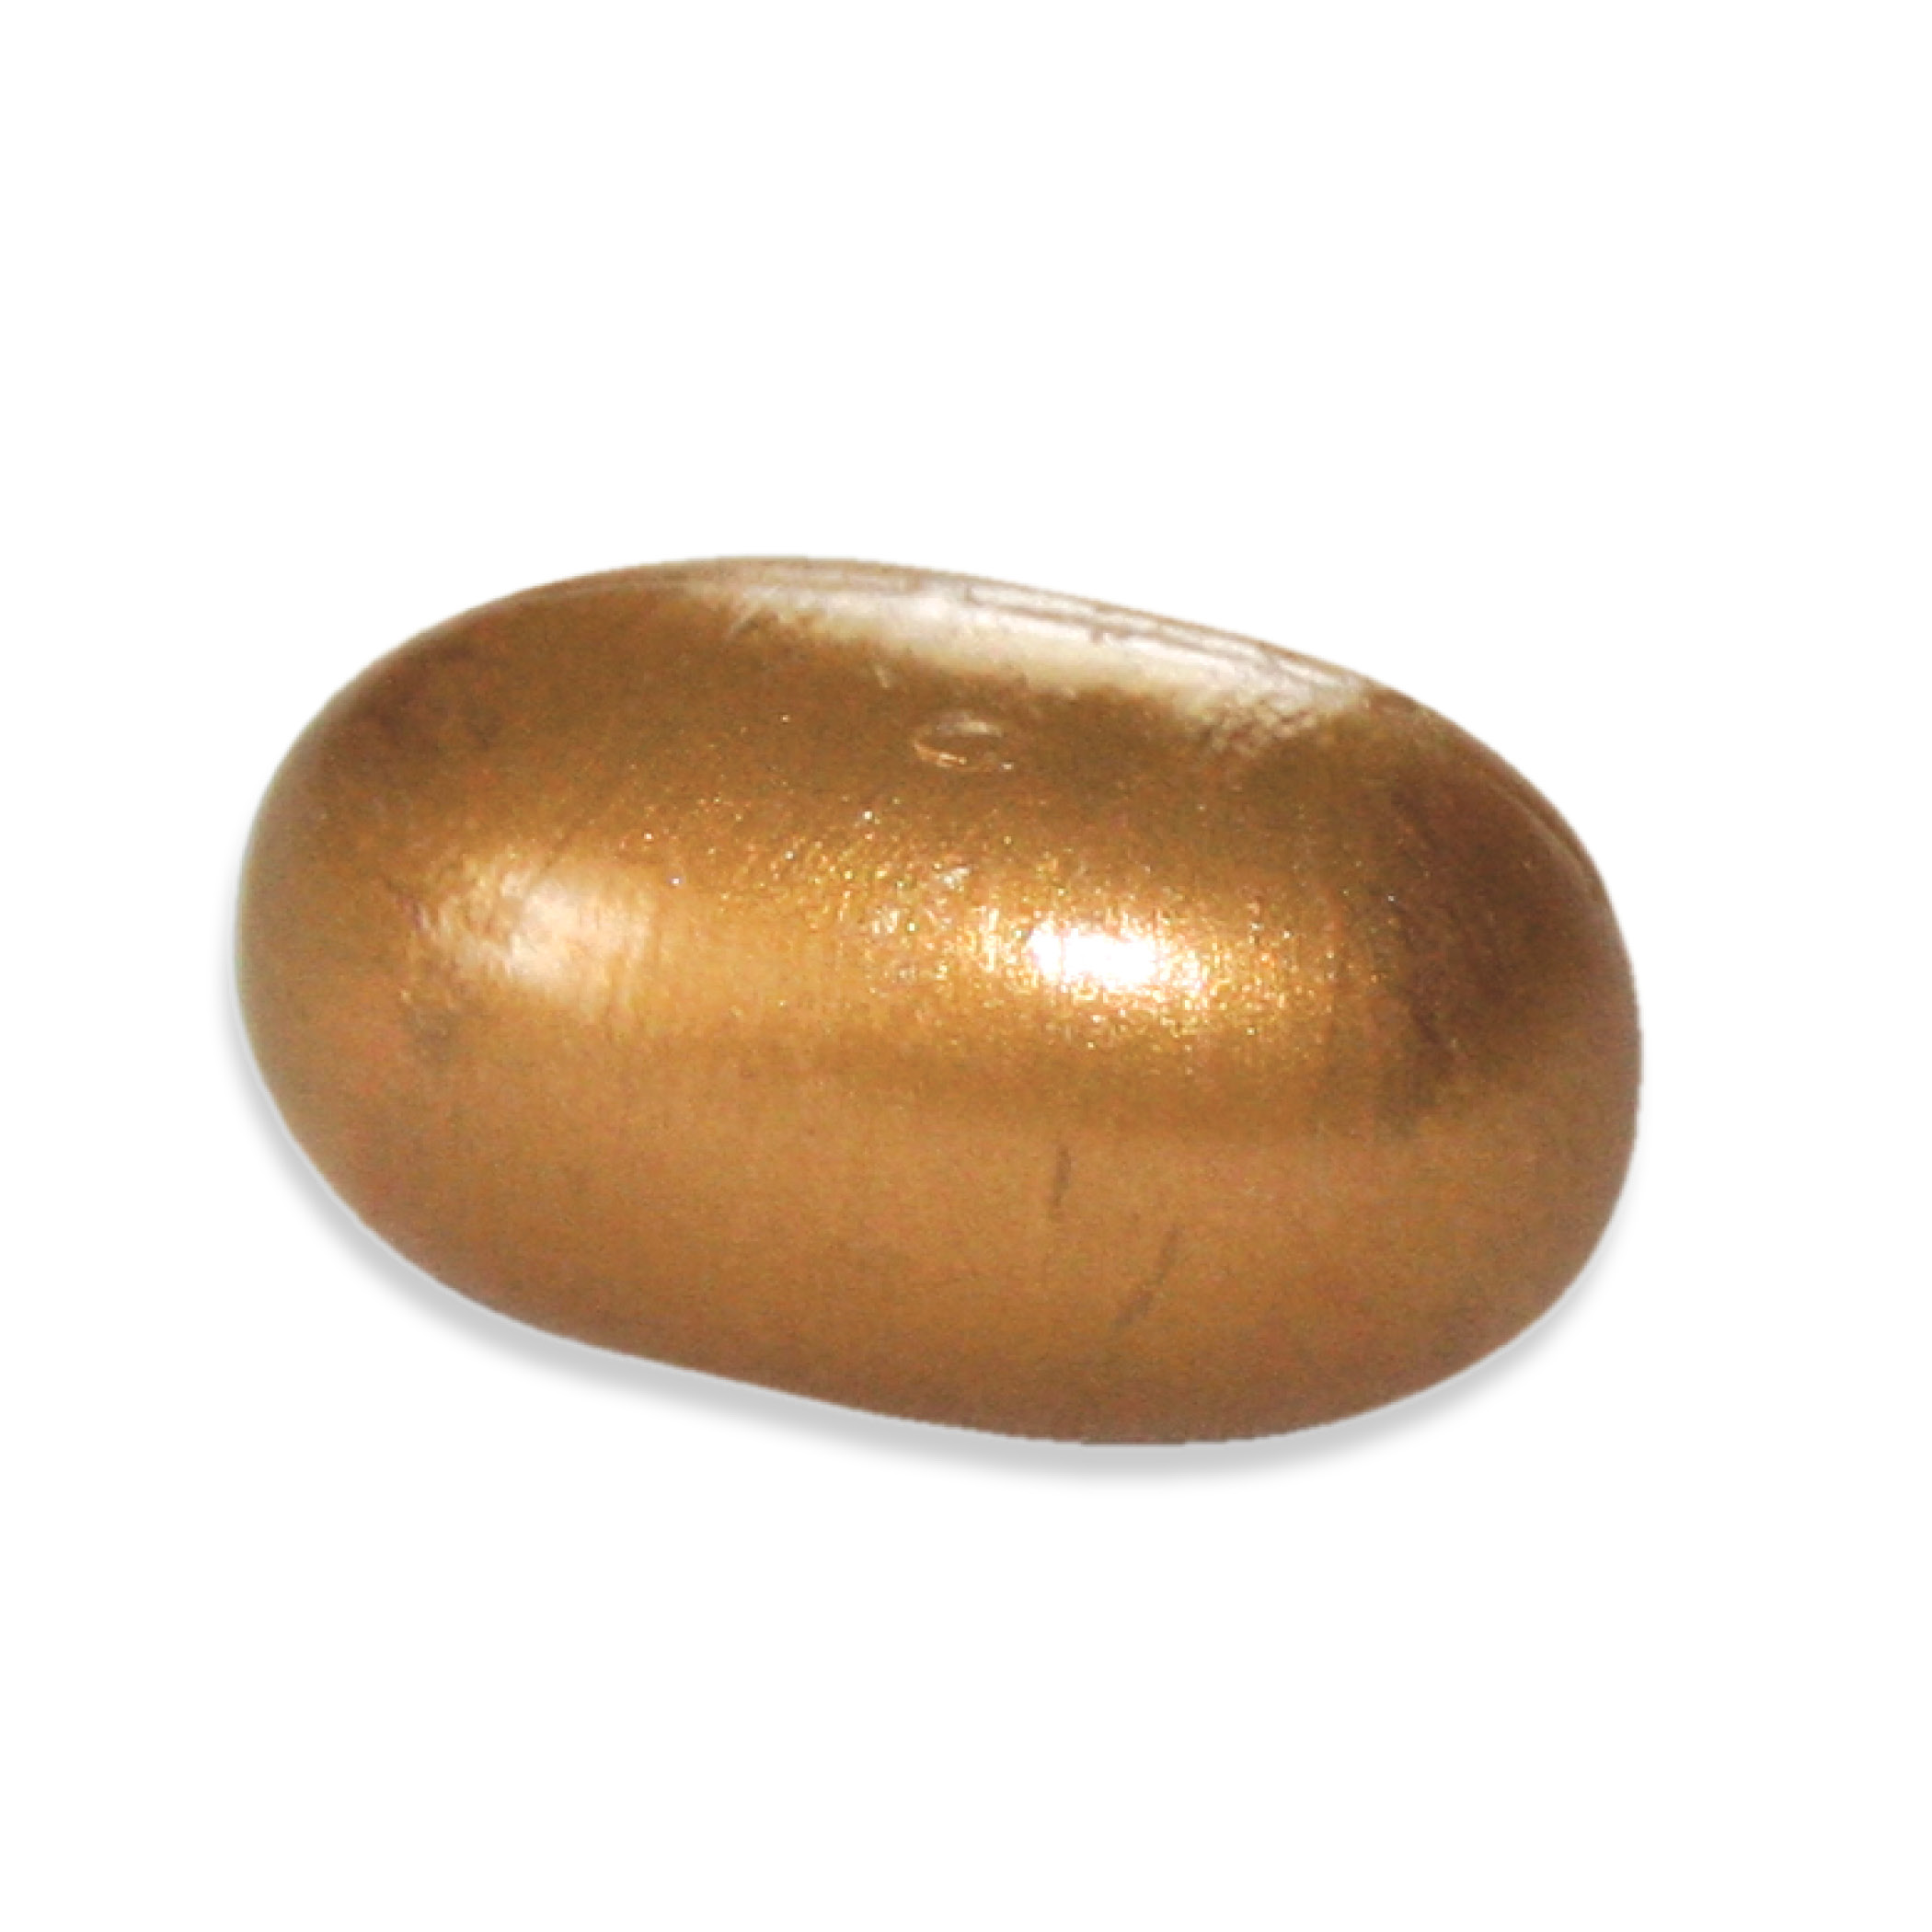 Gold colored shampoo pod modeled after the Pro-V icon.